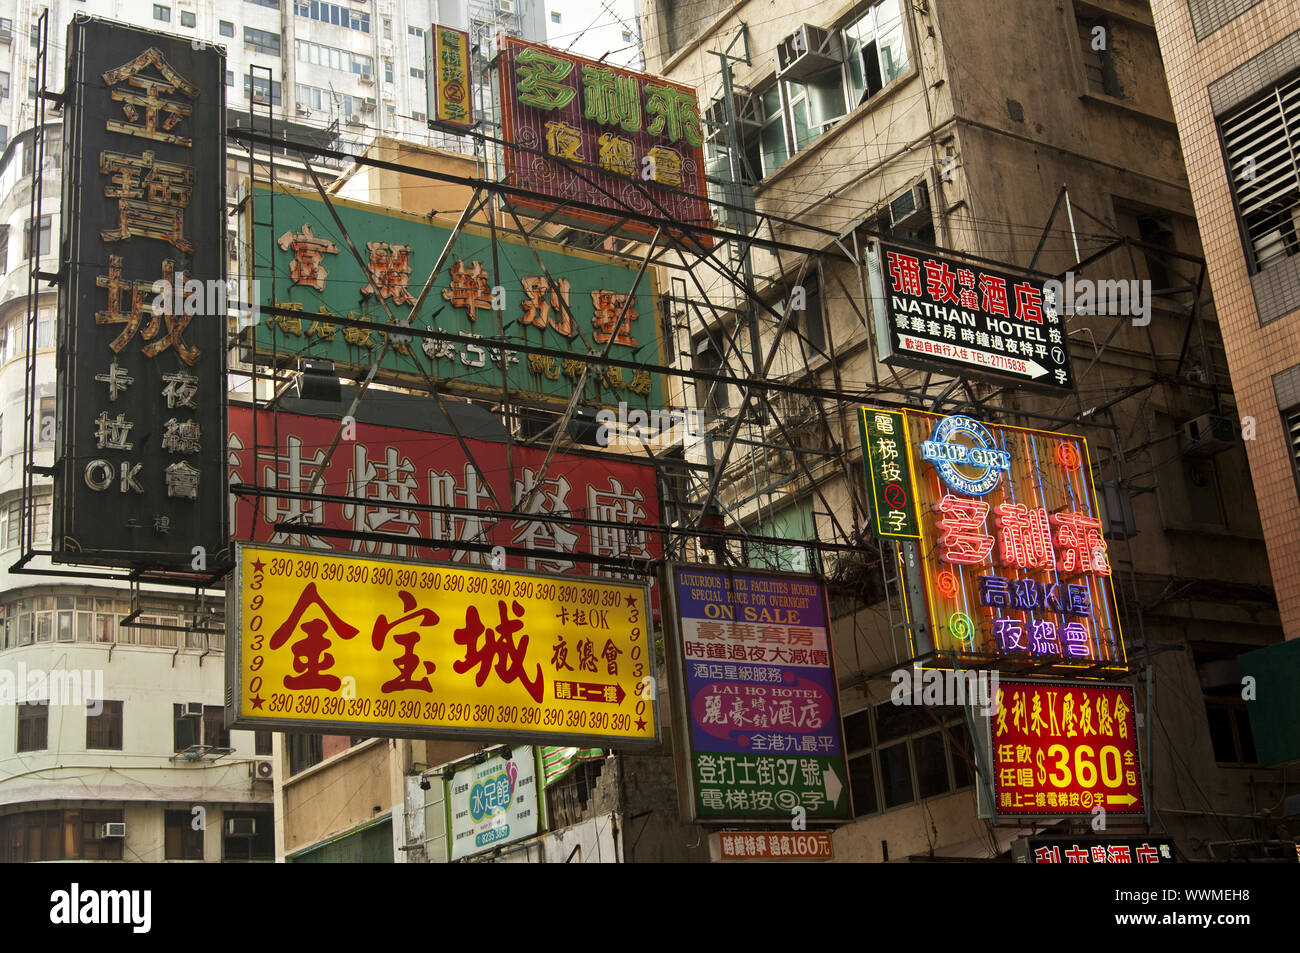 Advertising signs in Cantonese script for hotels and shops on Nathan Road Stock Photo